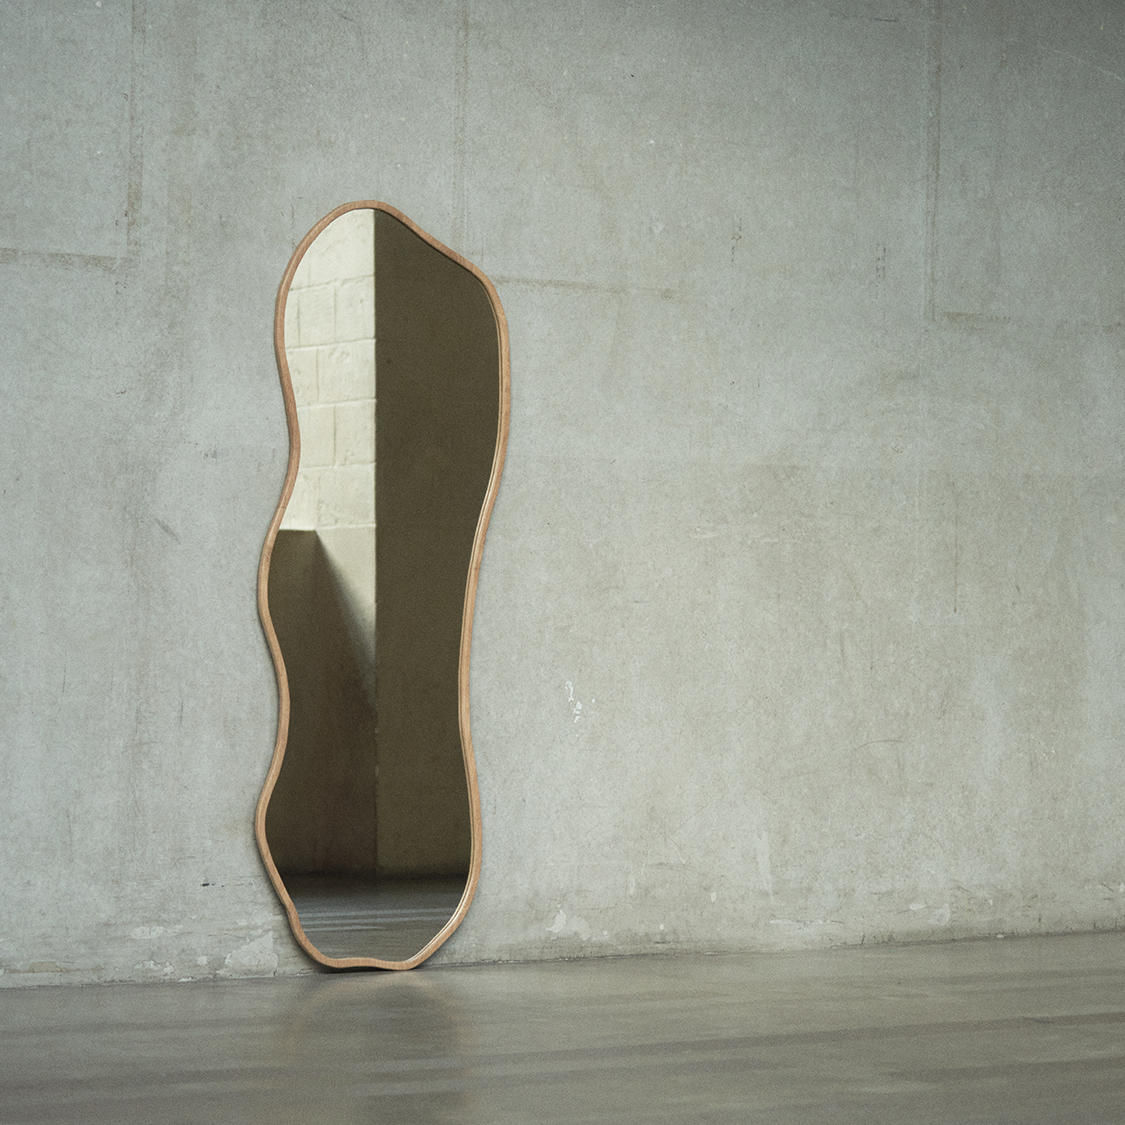 A mirror, Horta collection, frame is made of solid oak